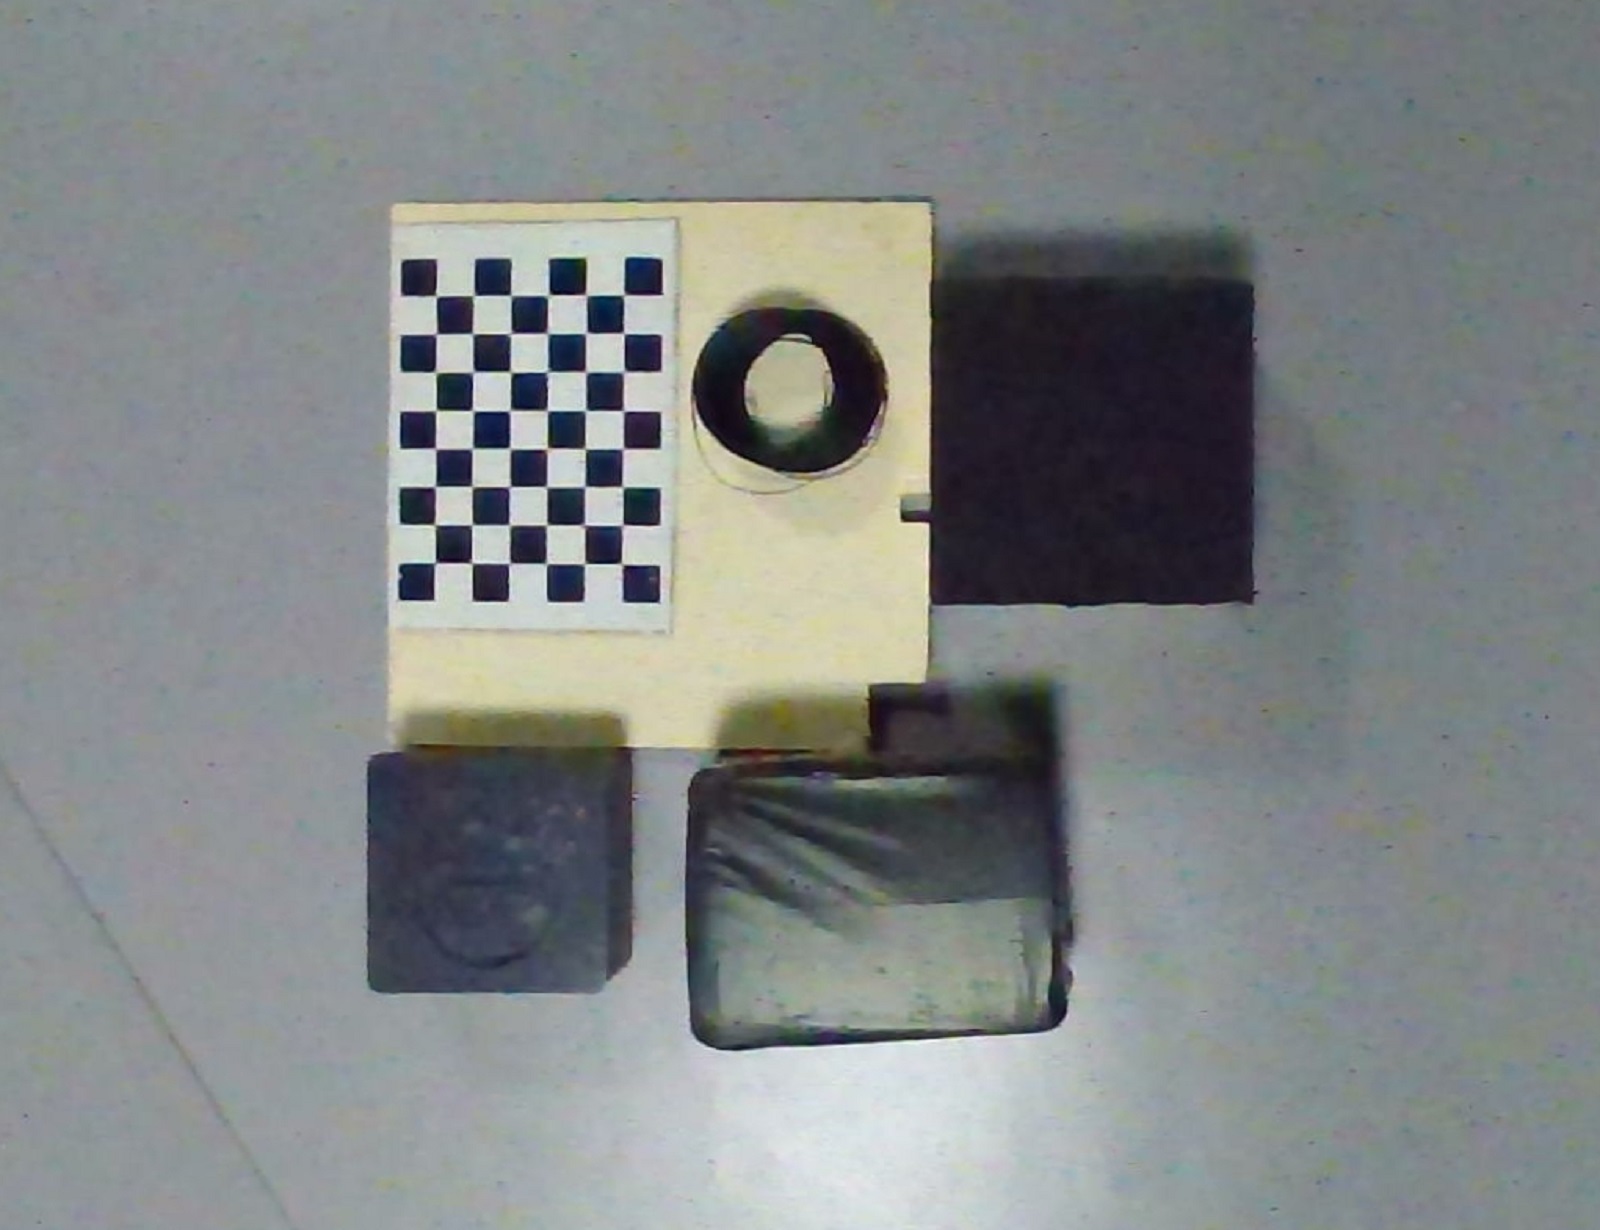 Checkerboard and Black Objects